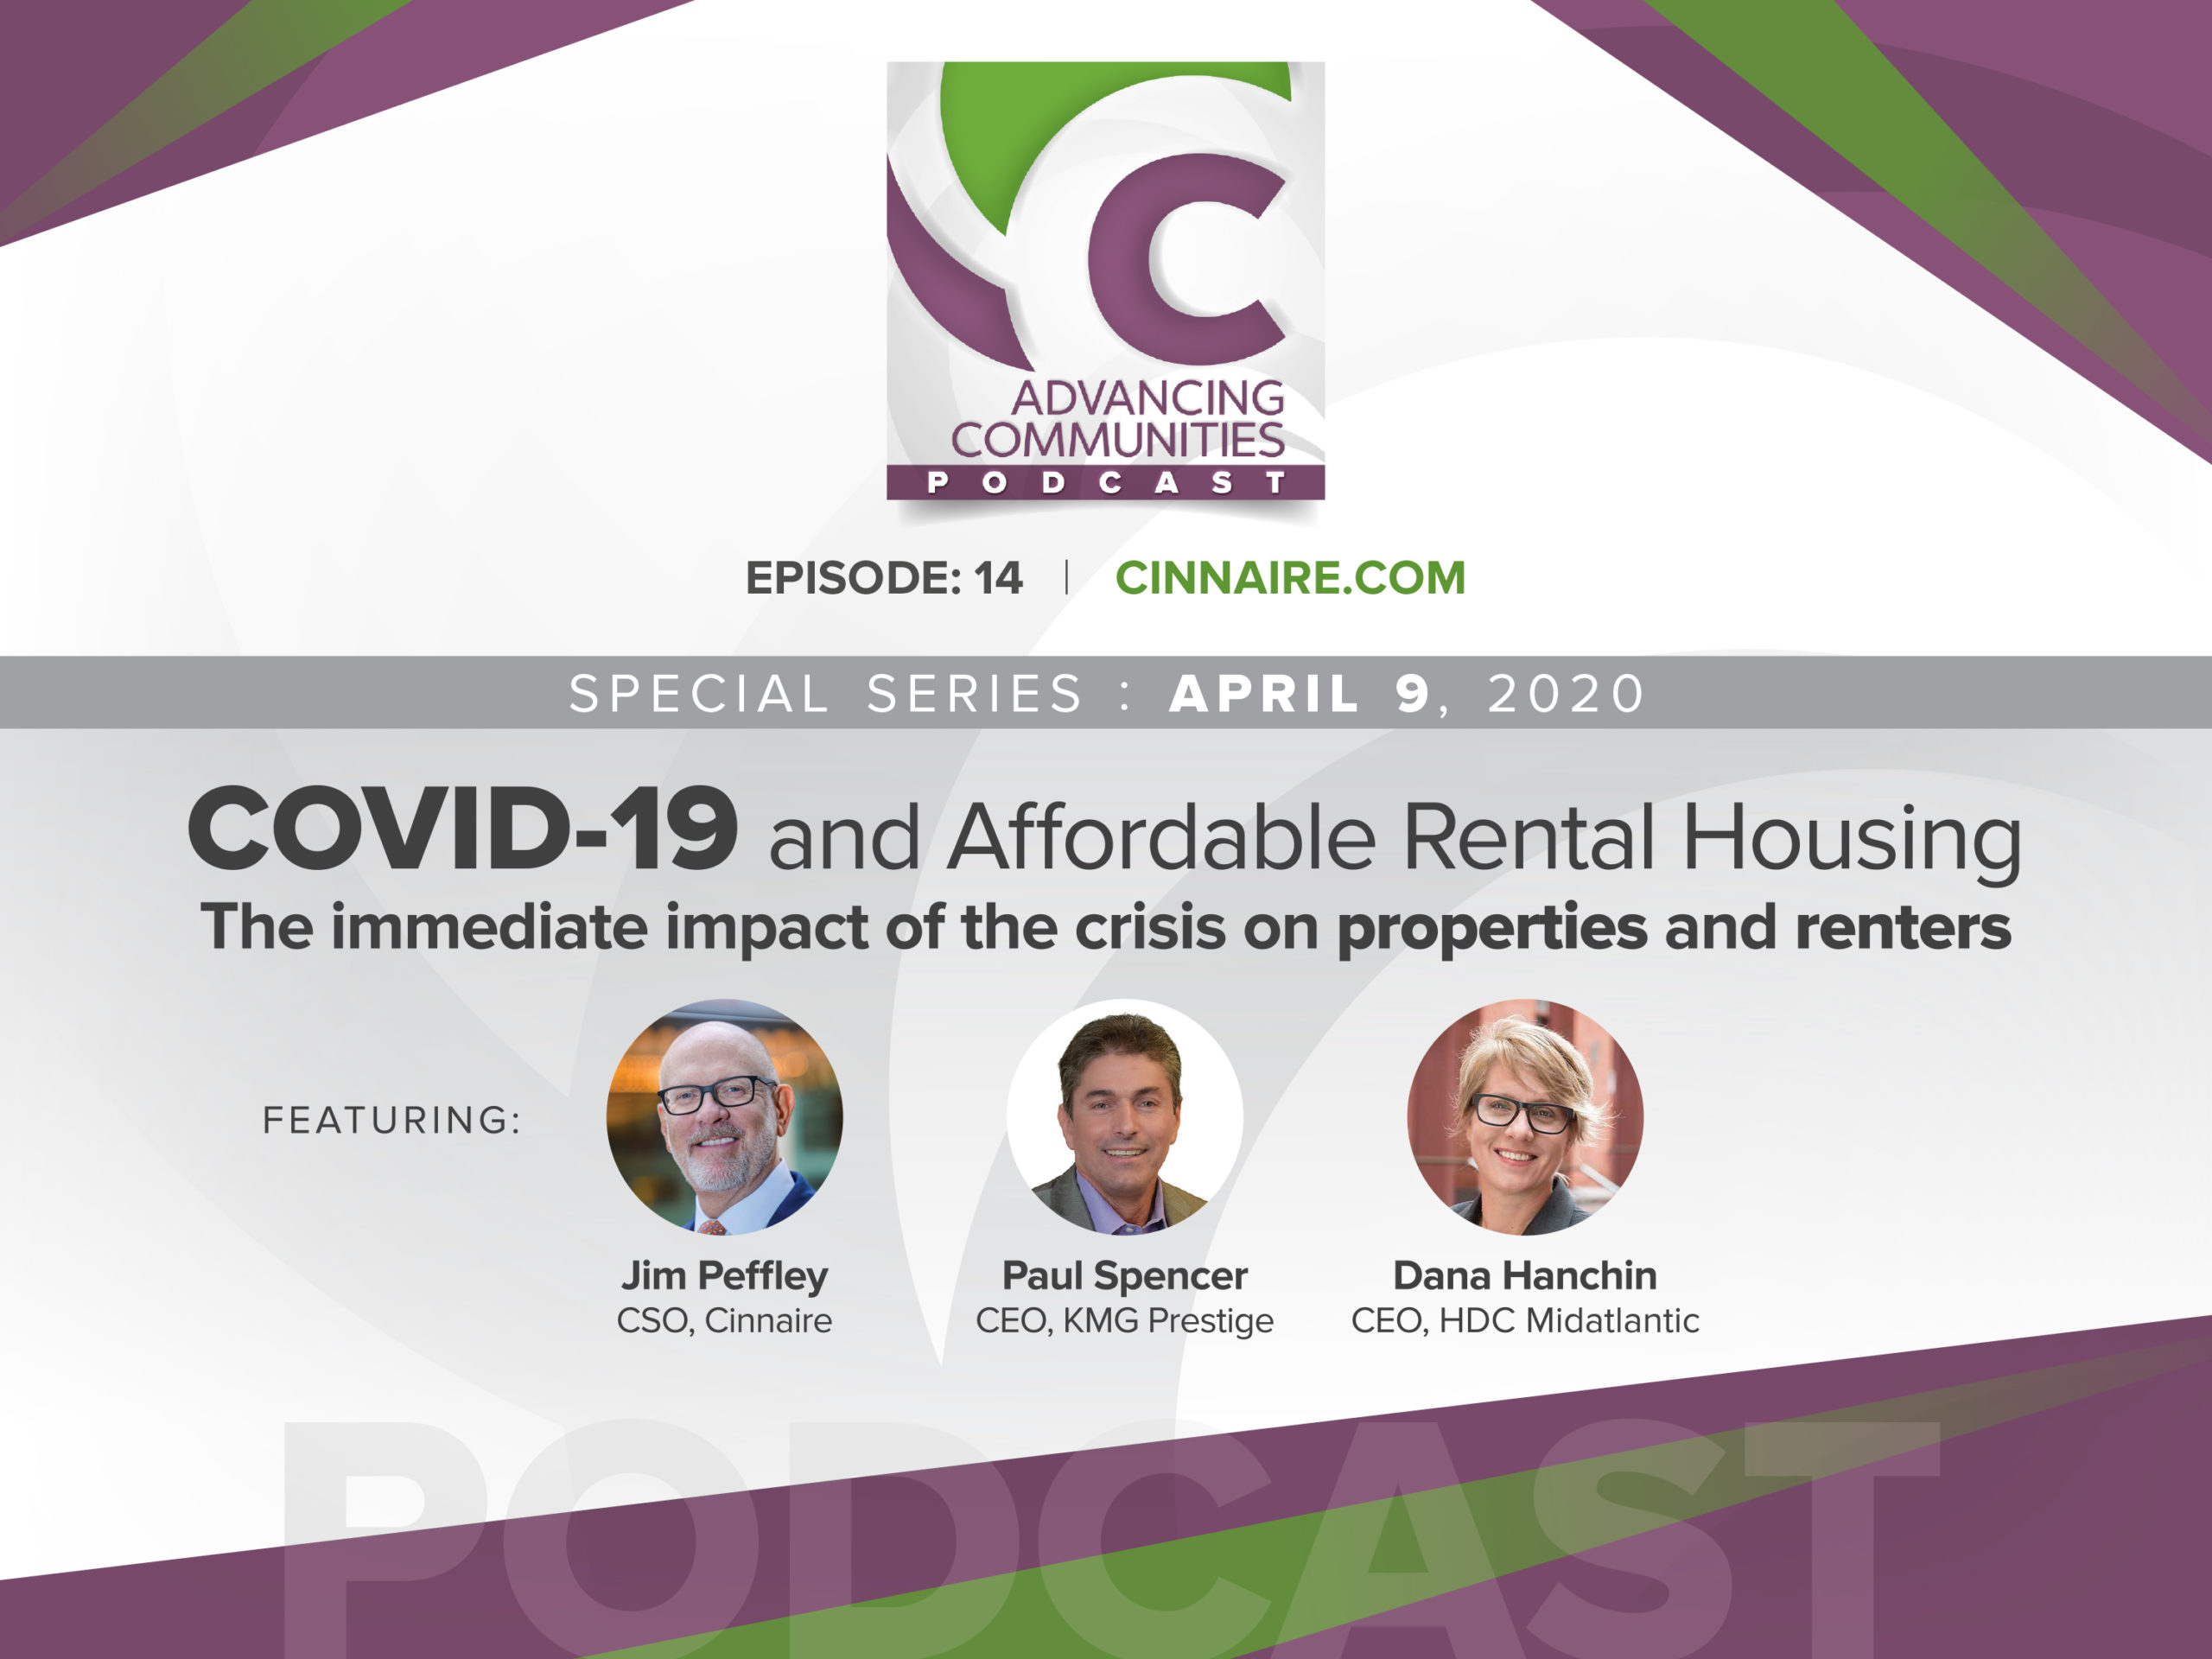 COVID-19 Special Series Podcast: Affordable Housing Managers Address the Serious Challenges the Crisis Presents